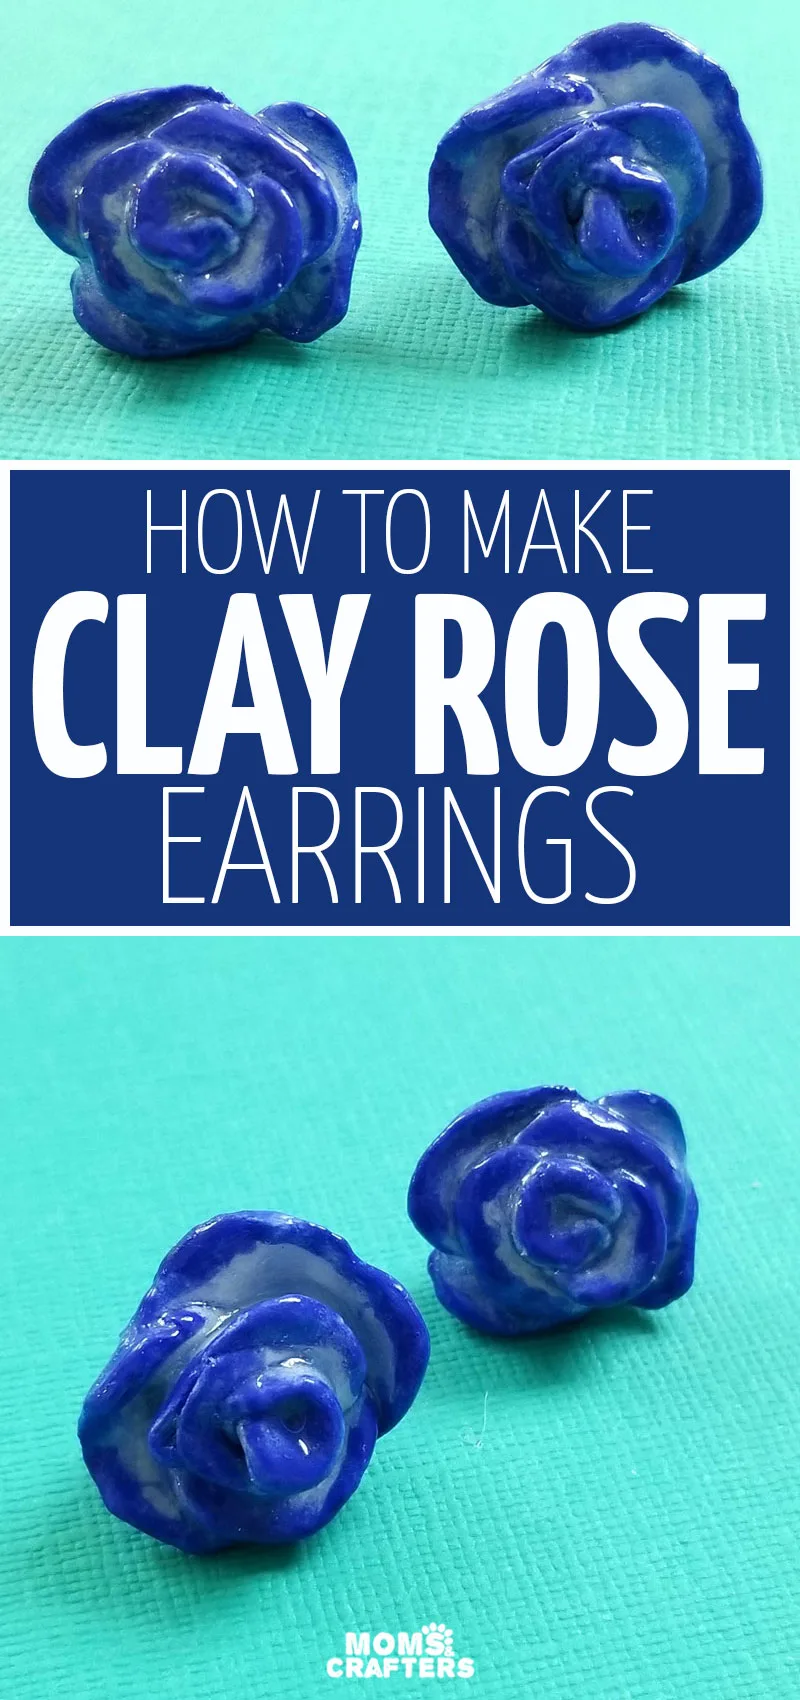 How To Make Clay Rose Earrings Moms And Crafters